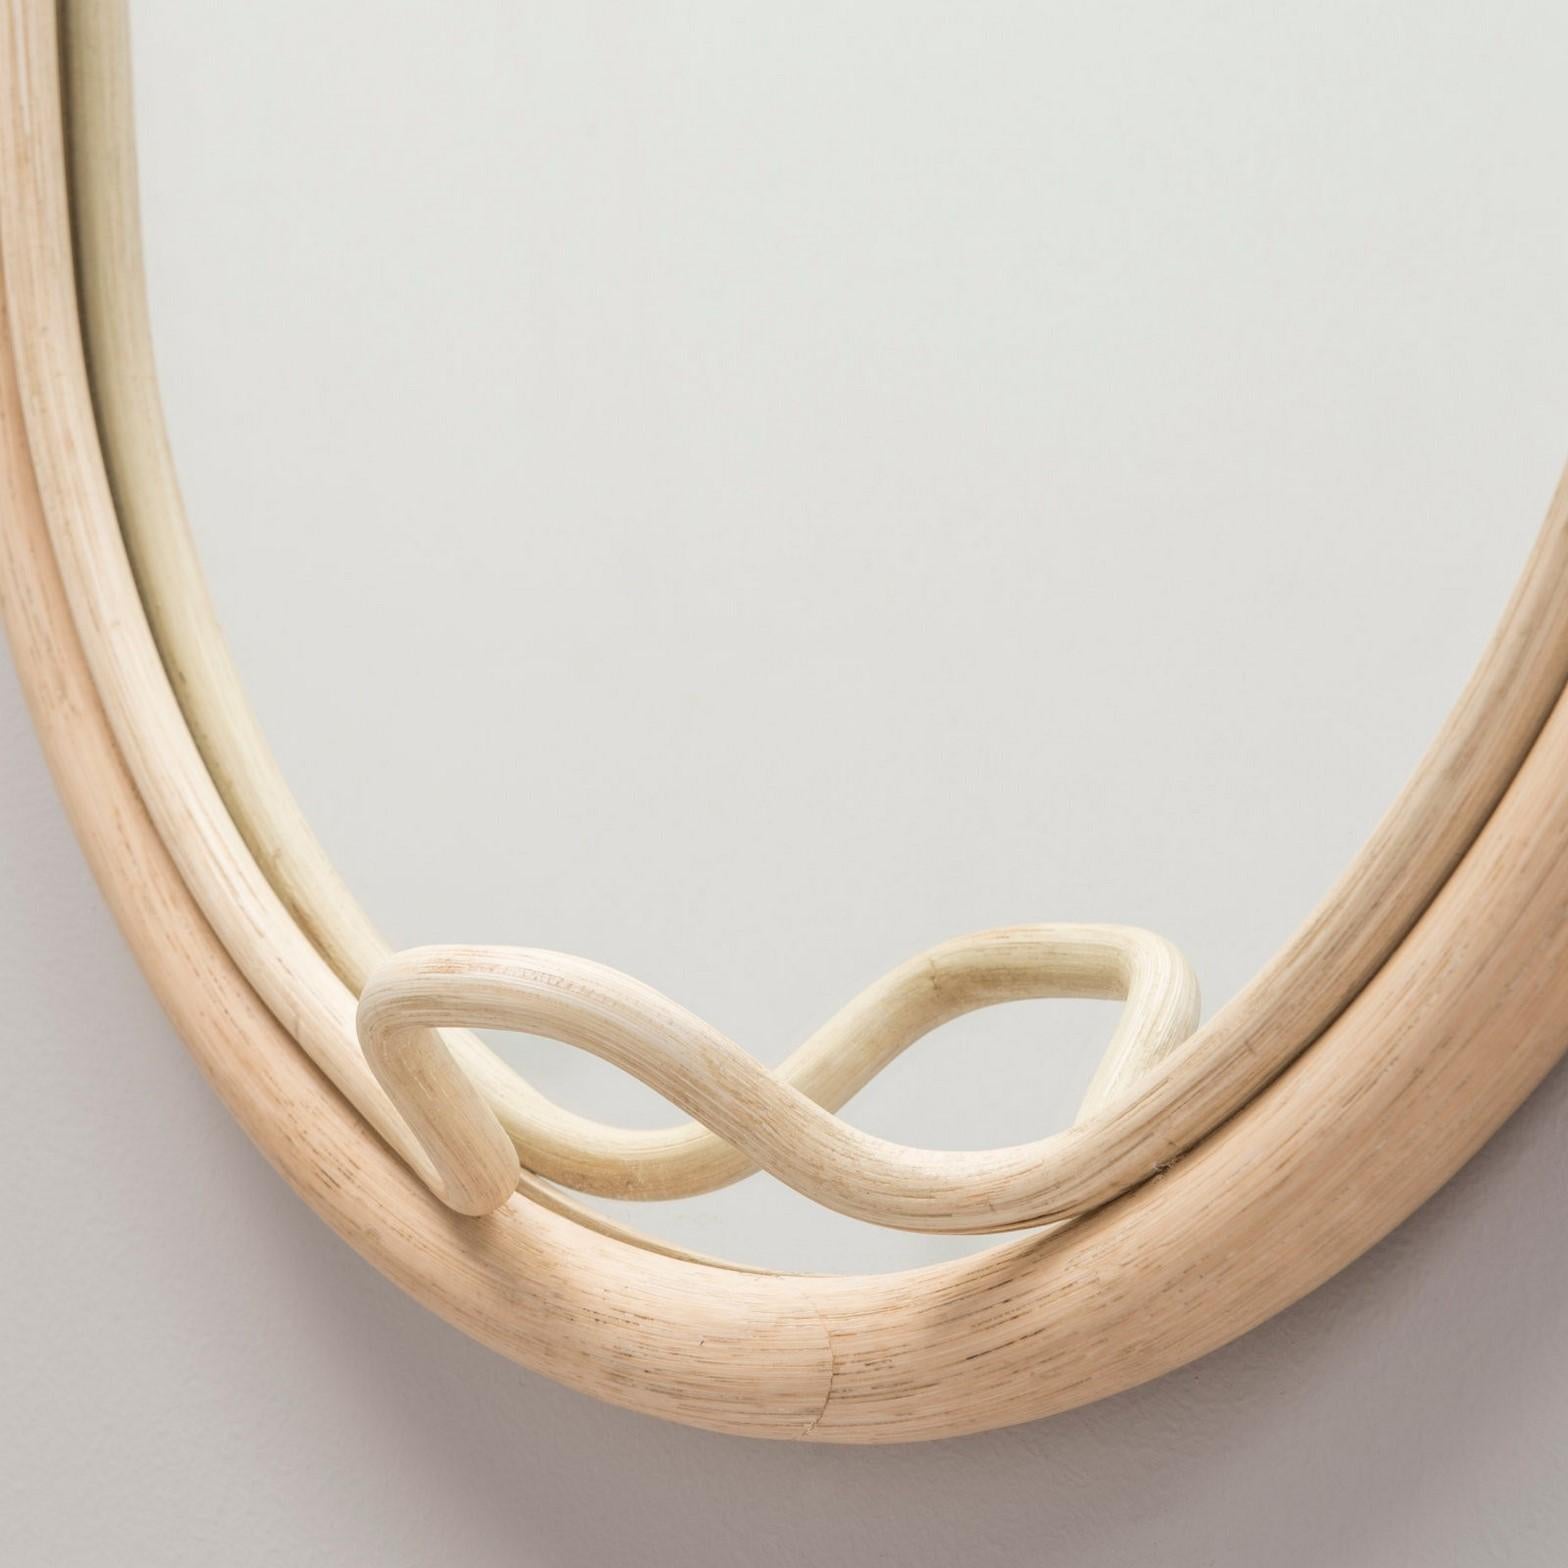 Wall mirror, French design and work of a great fineness in natural fiber with an integrated coat hook. New item, never used.